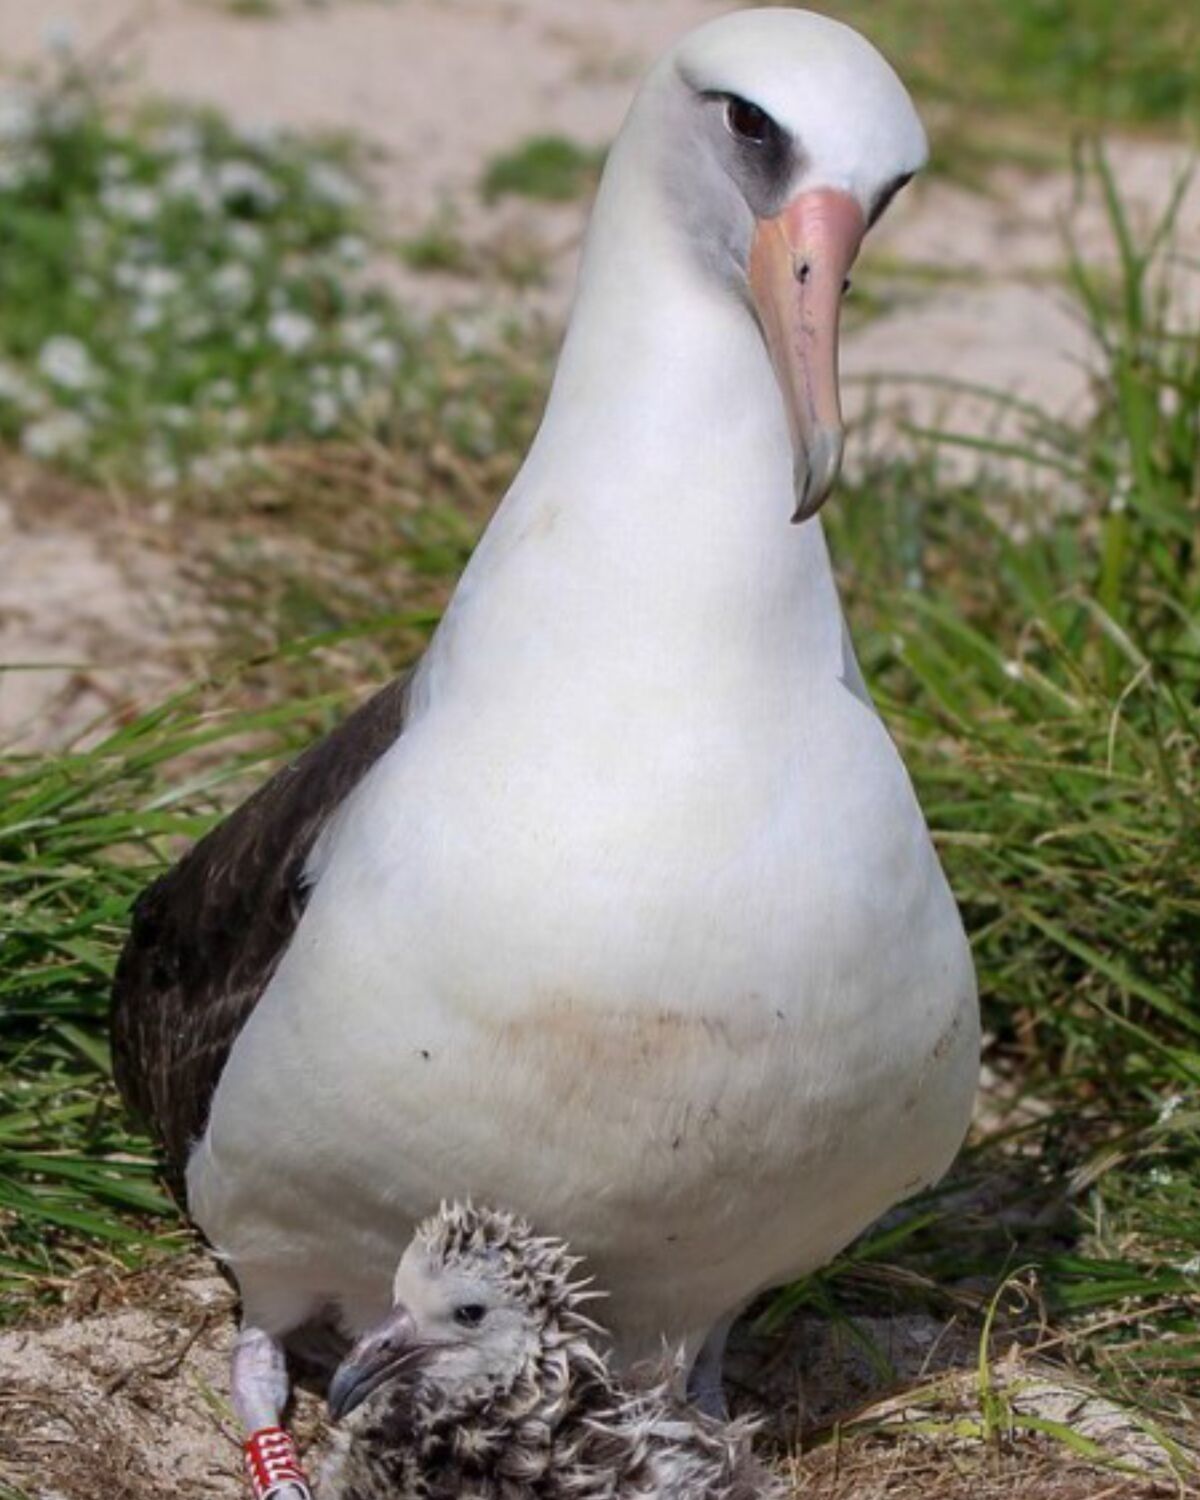 An albatross is shown with a newly hatched offspring.